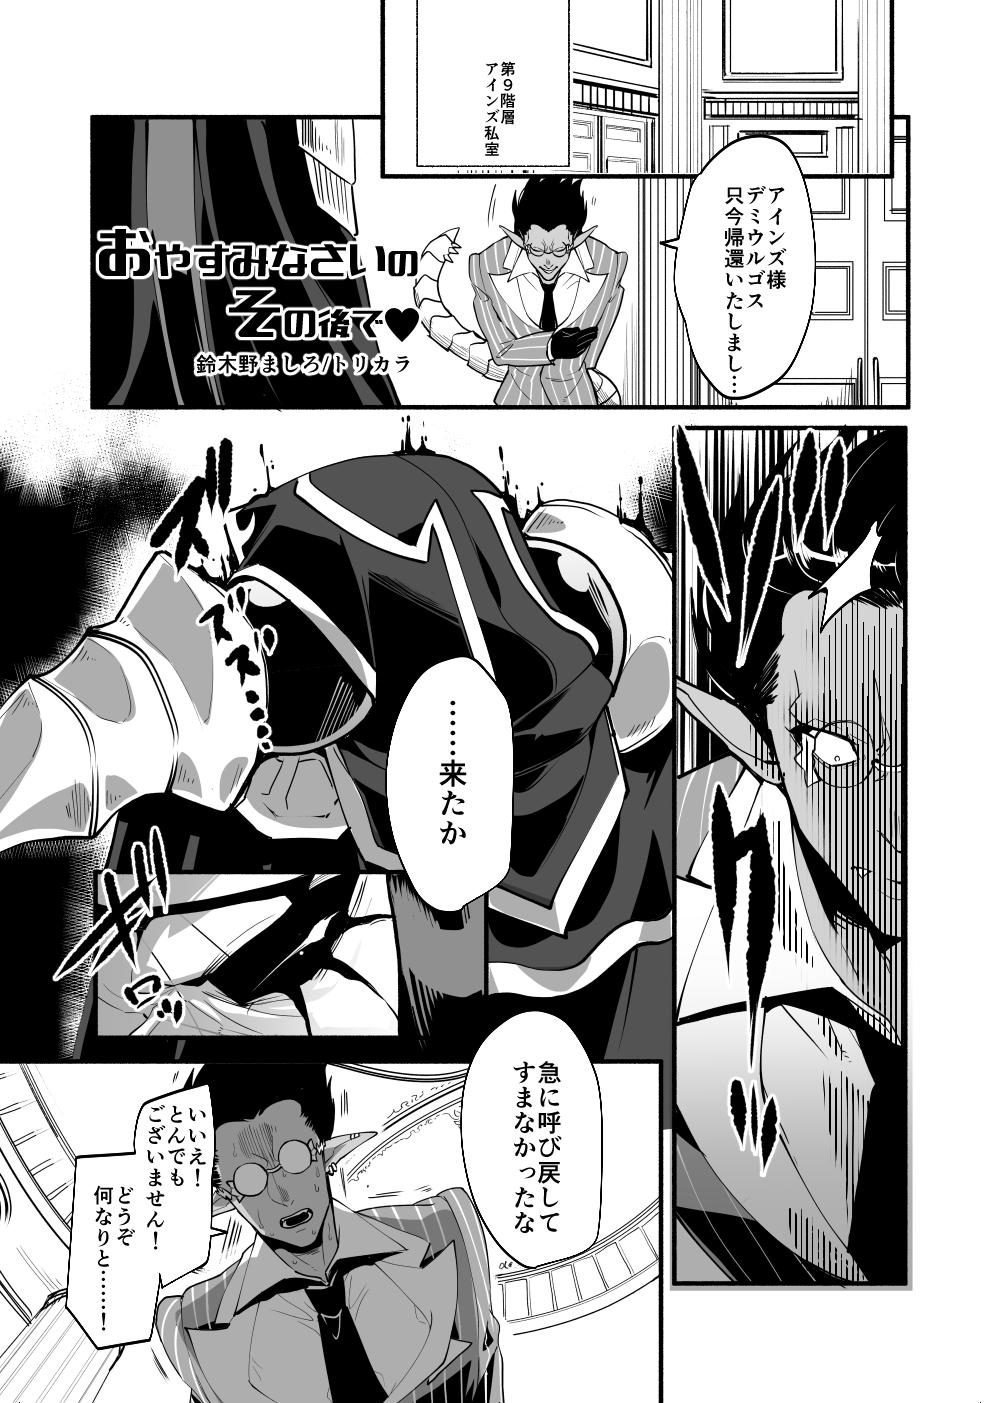 Belly Nennen Korori - Overlord Culo - Page 2